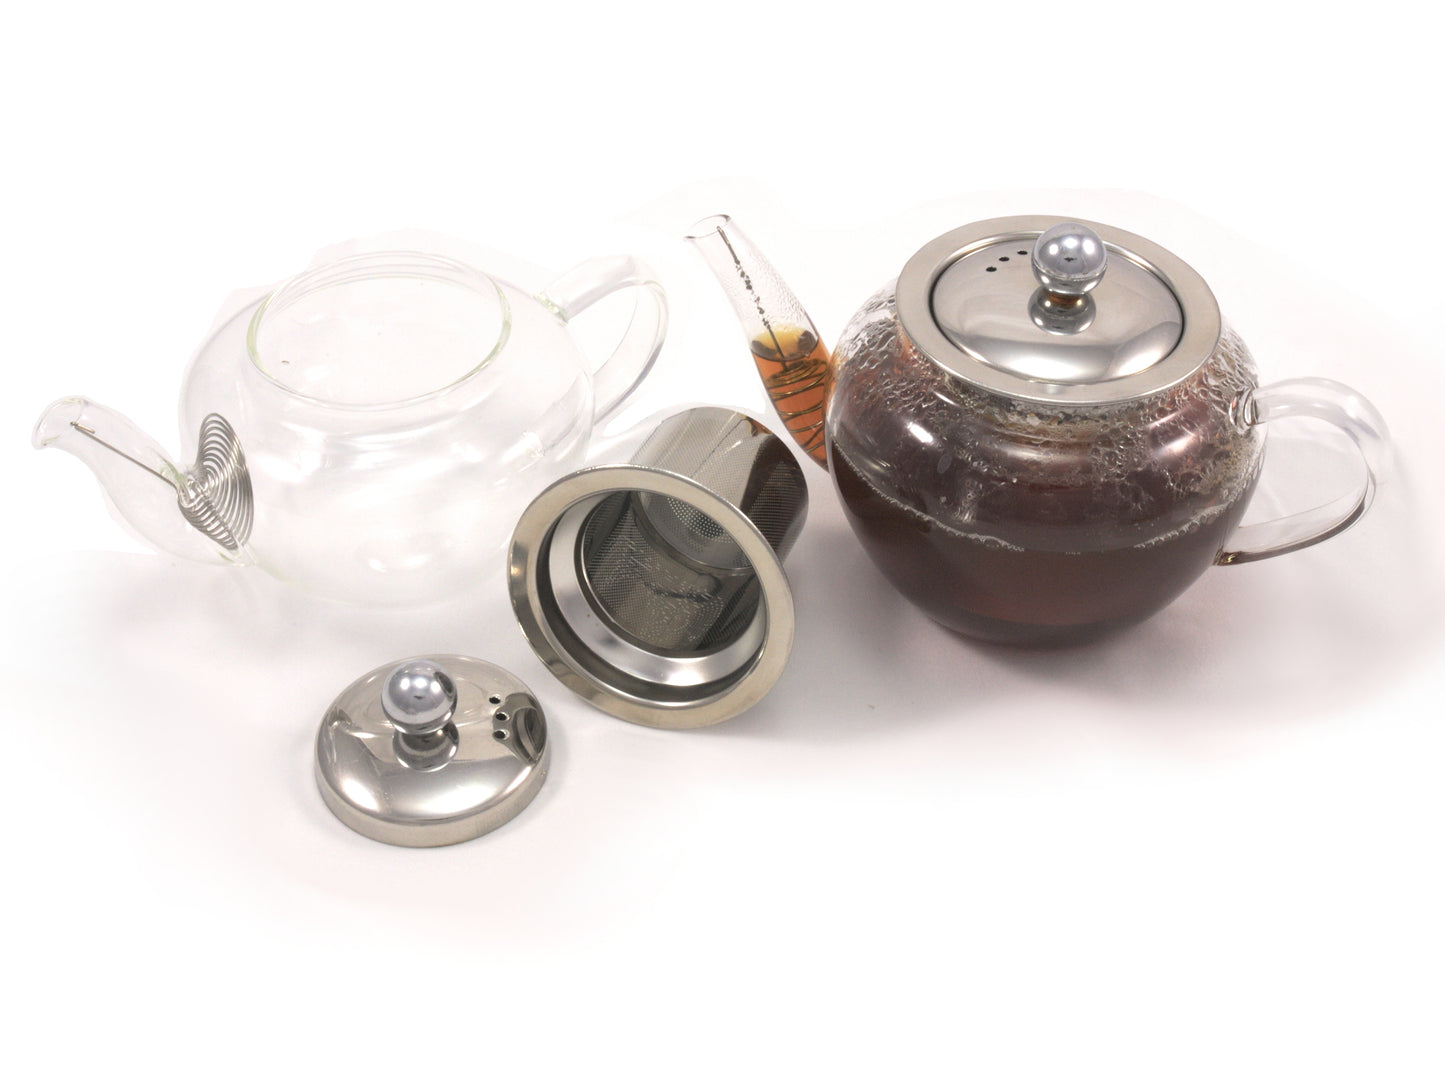 CHEF-HUB GLASS TEAPOT WITH INFUSER 600ML